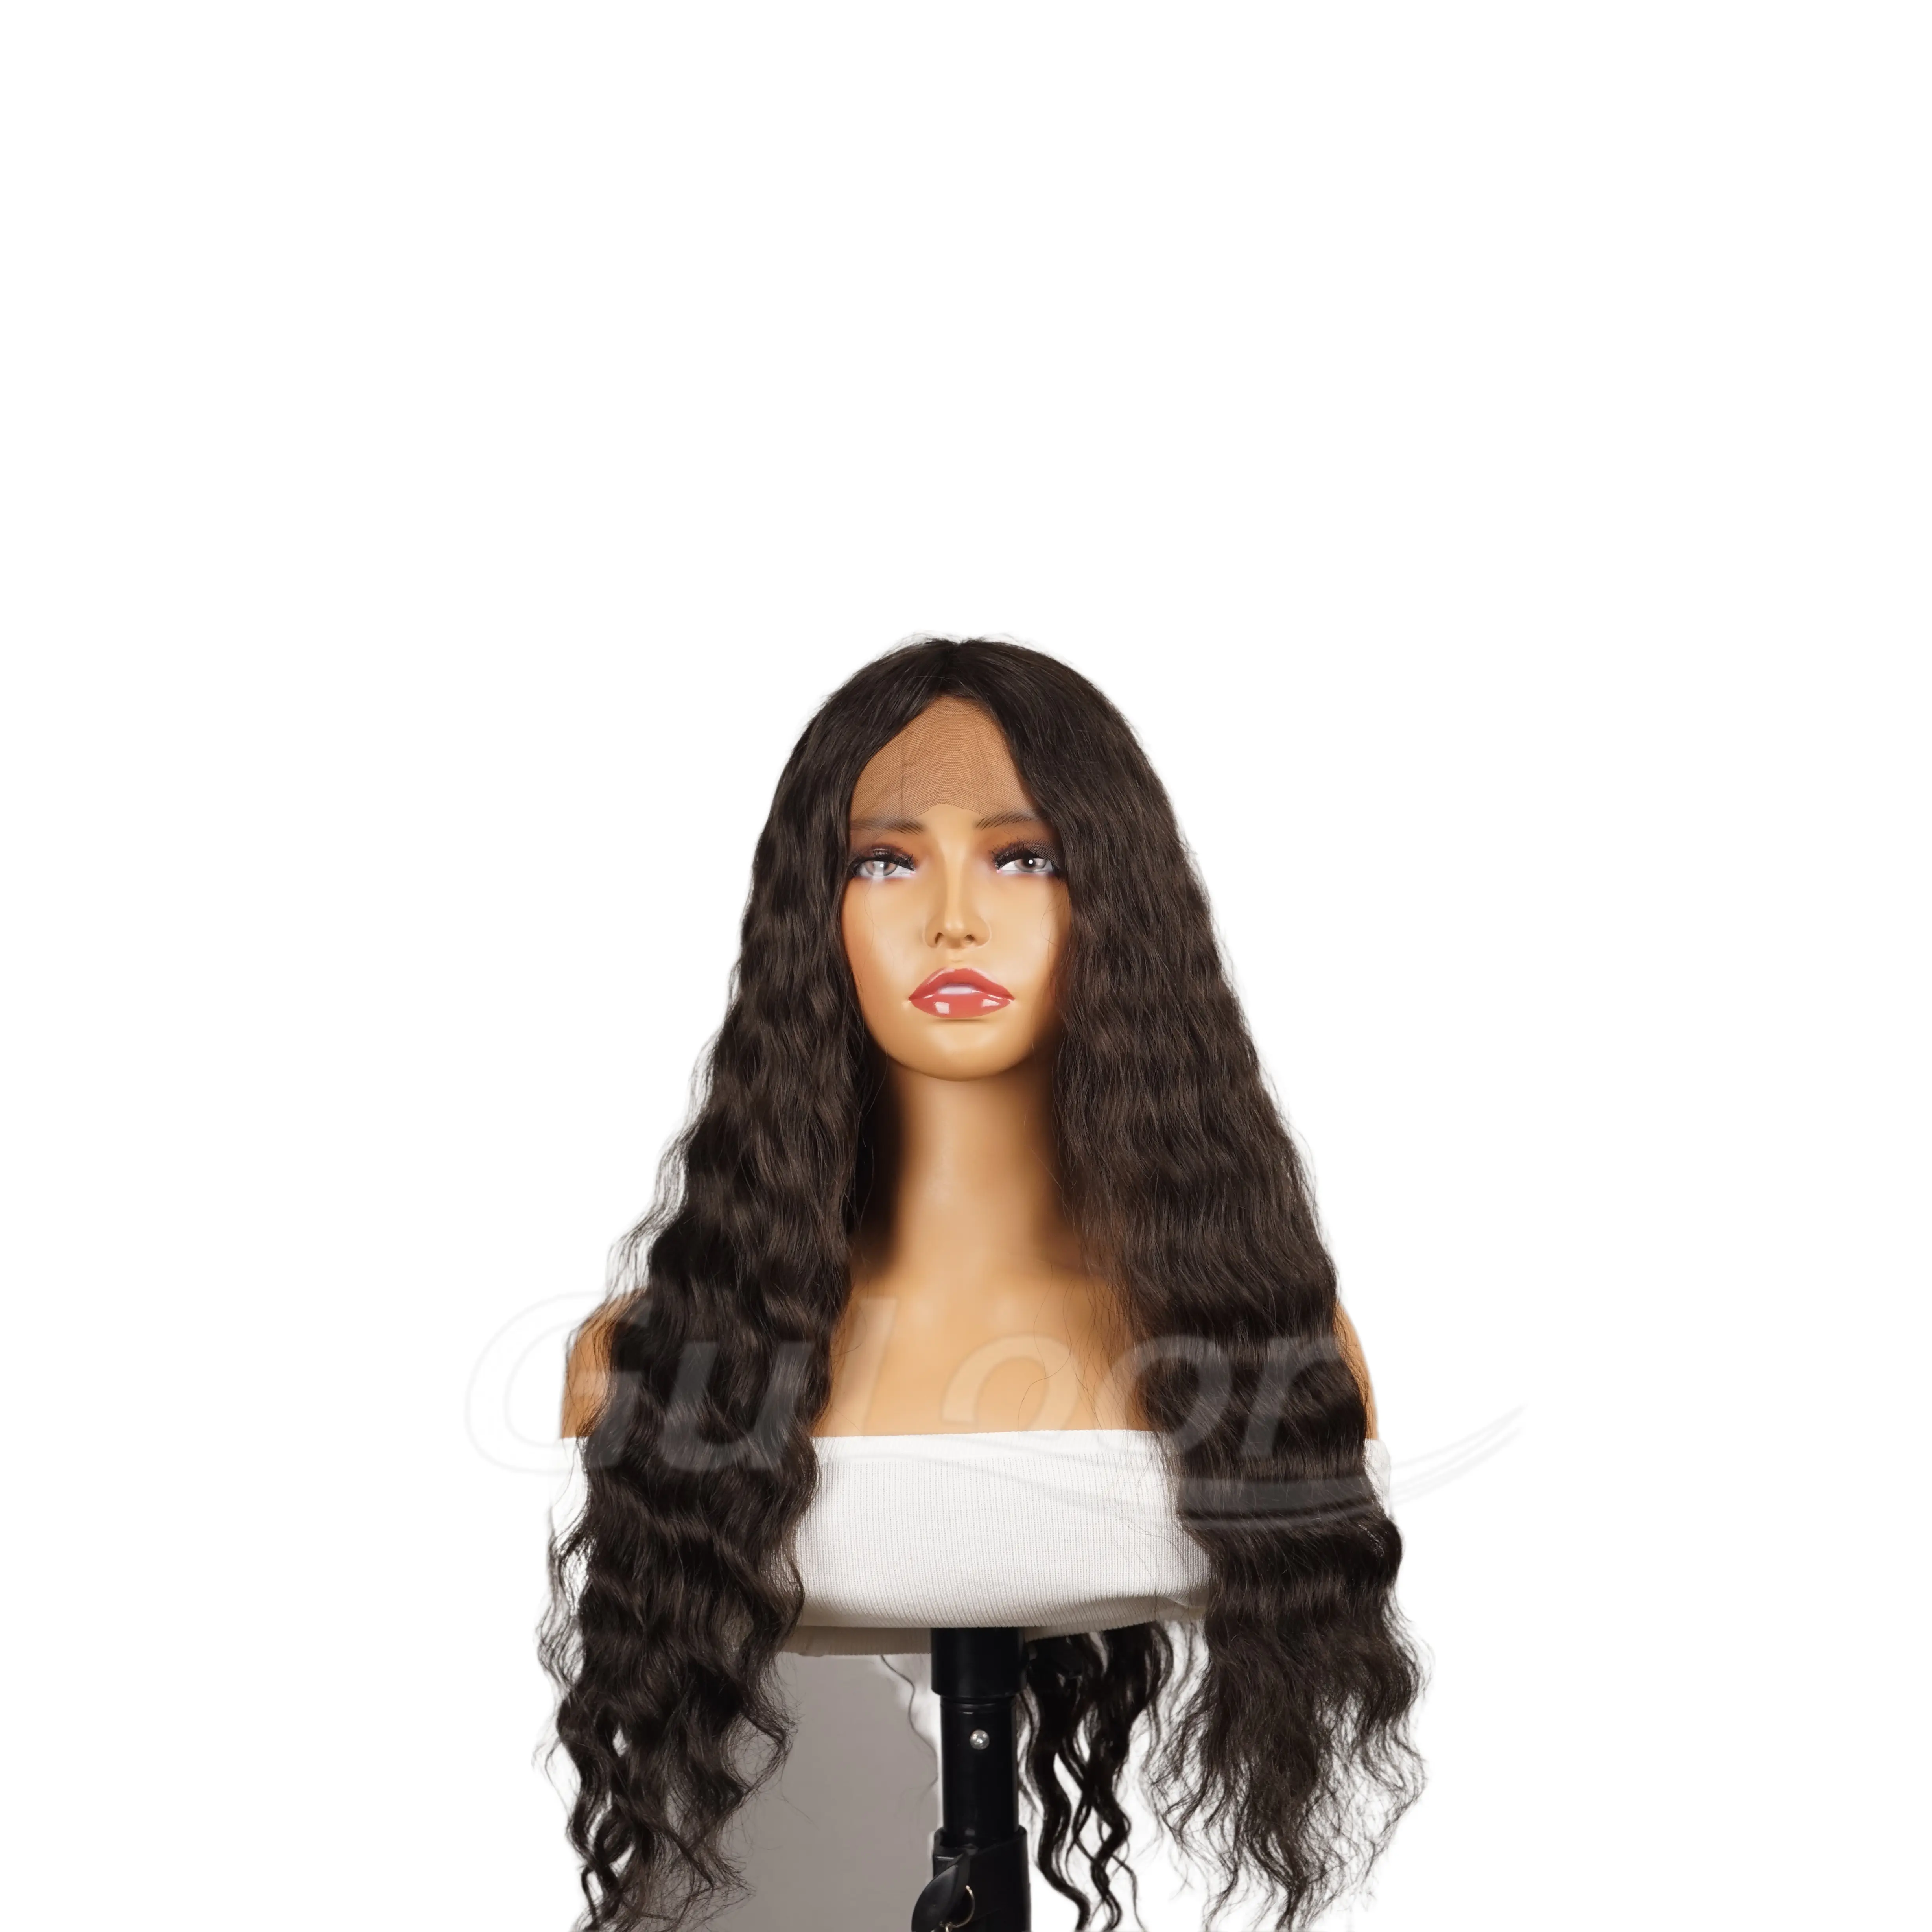 Full lace hand crocheted wig color #2 hair length 24 inches